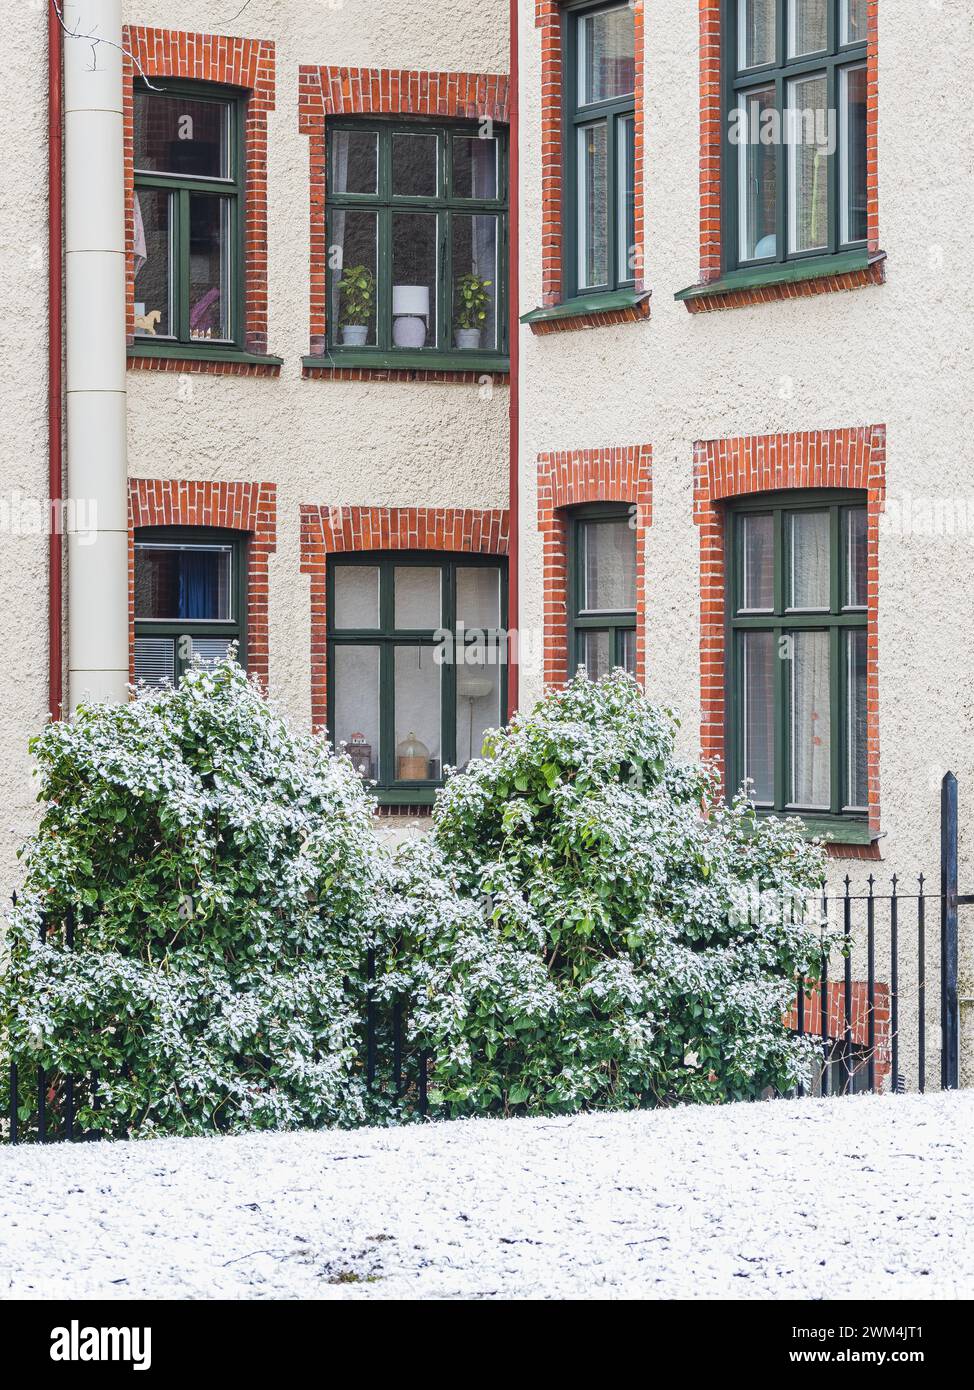 Fresh snow lightly covers the green shrubs situated in front of a classic apartment building with distinctive windows and brick detailing in Gothenbur Stock Photo